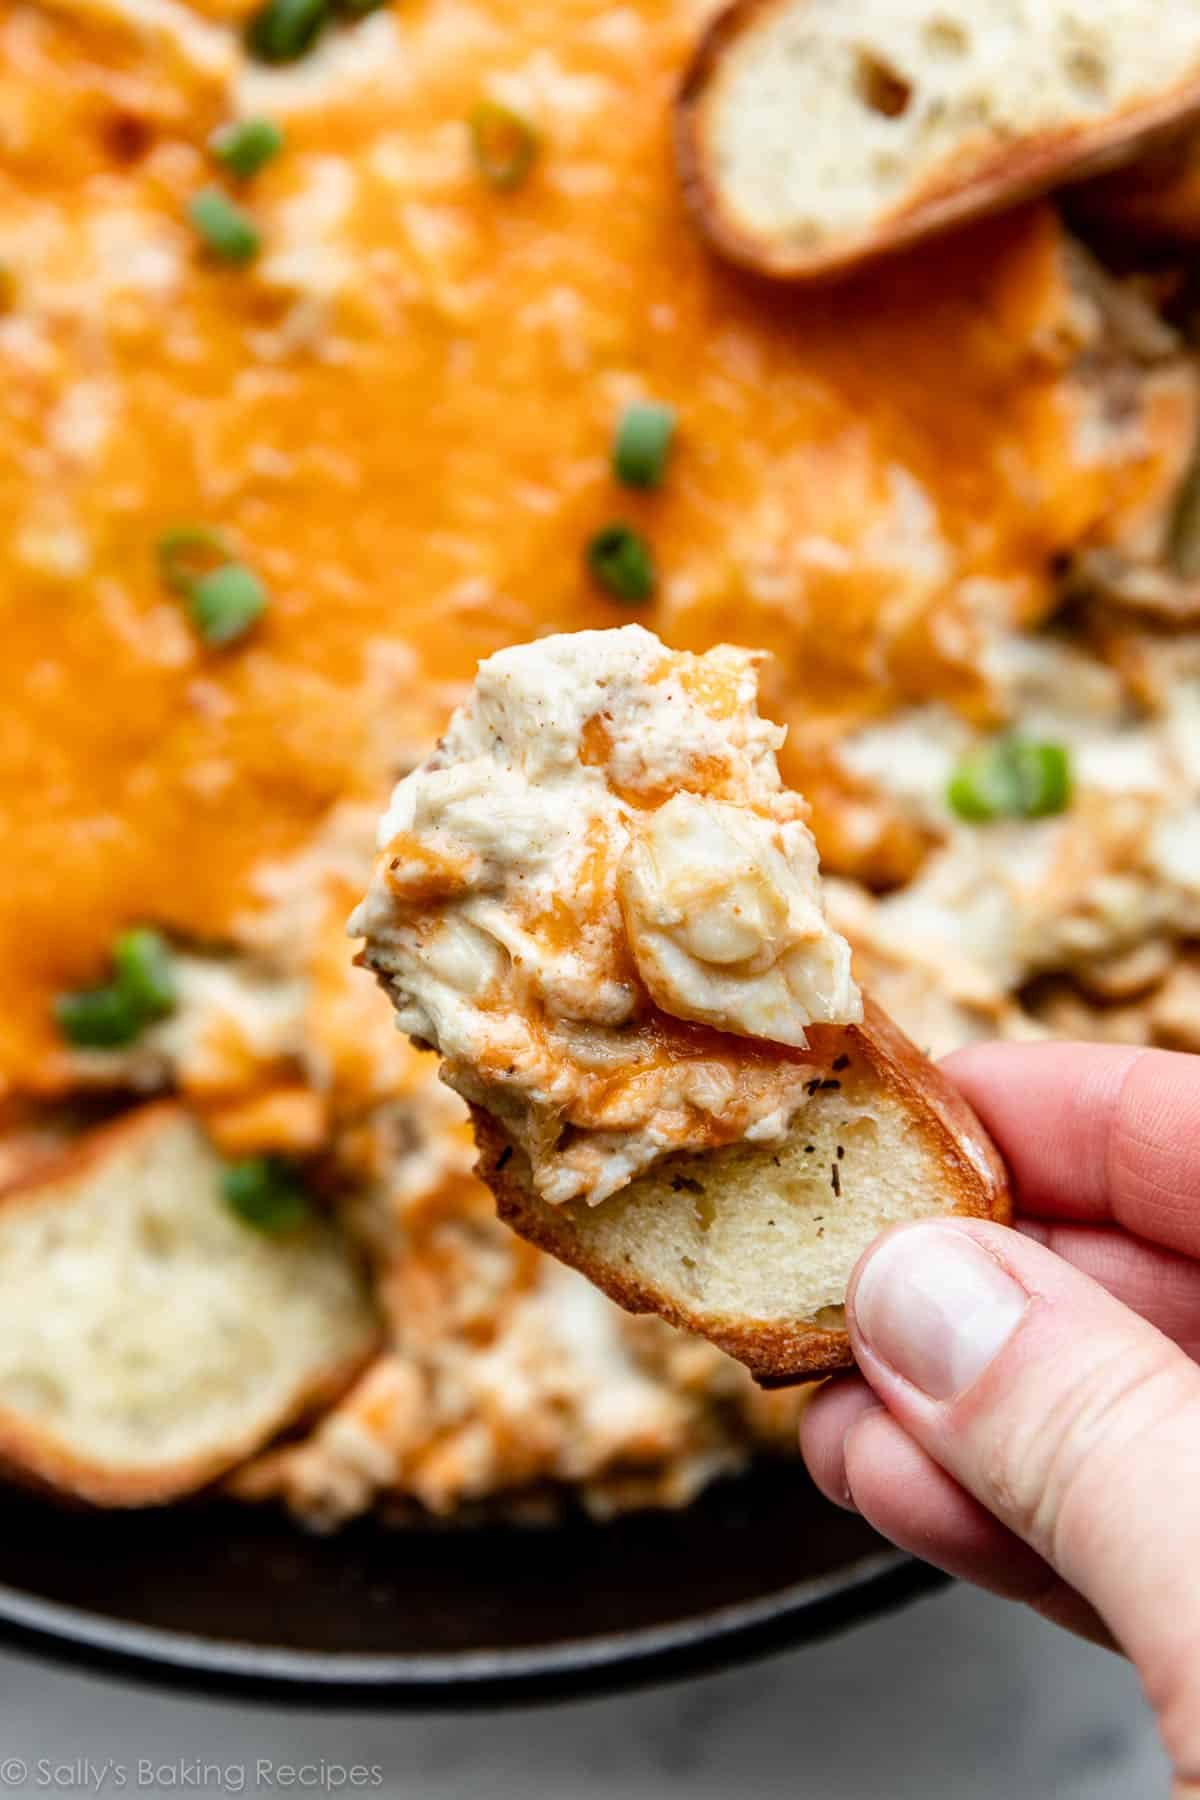 Actual Maryland Crab Dip (The Finest!)